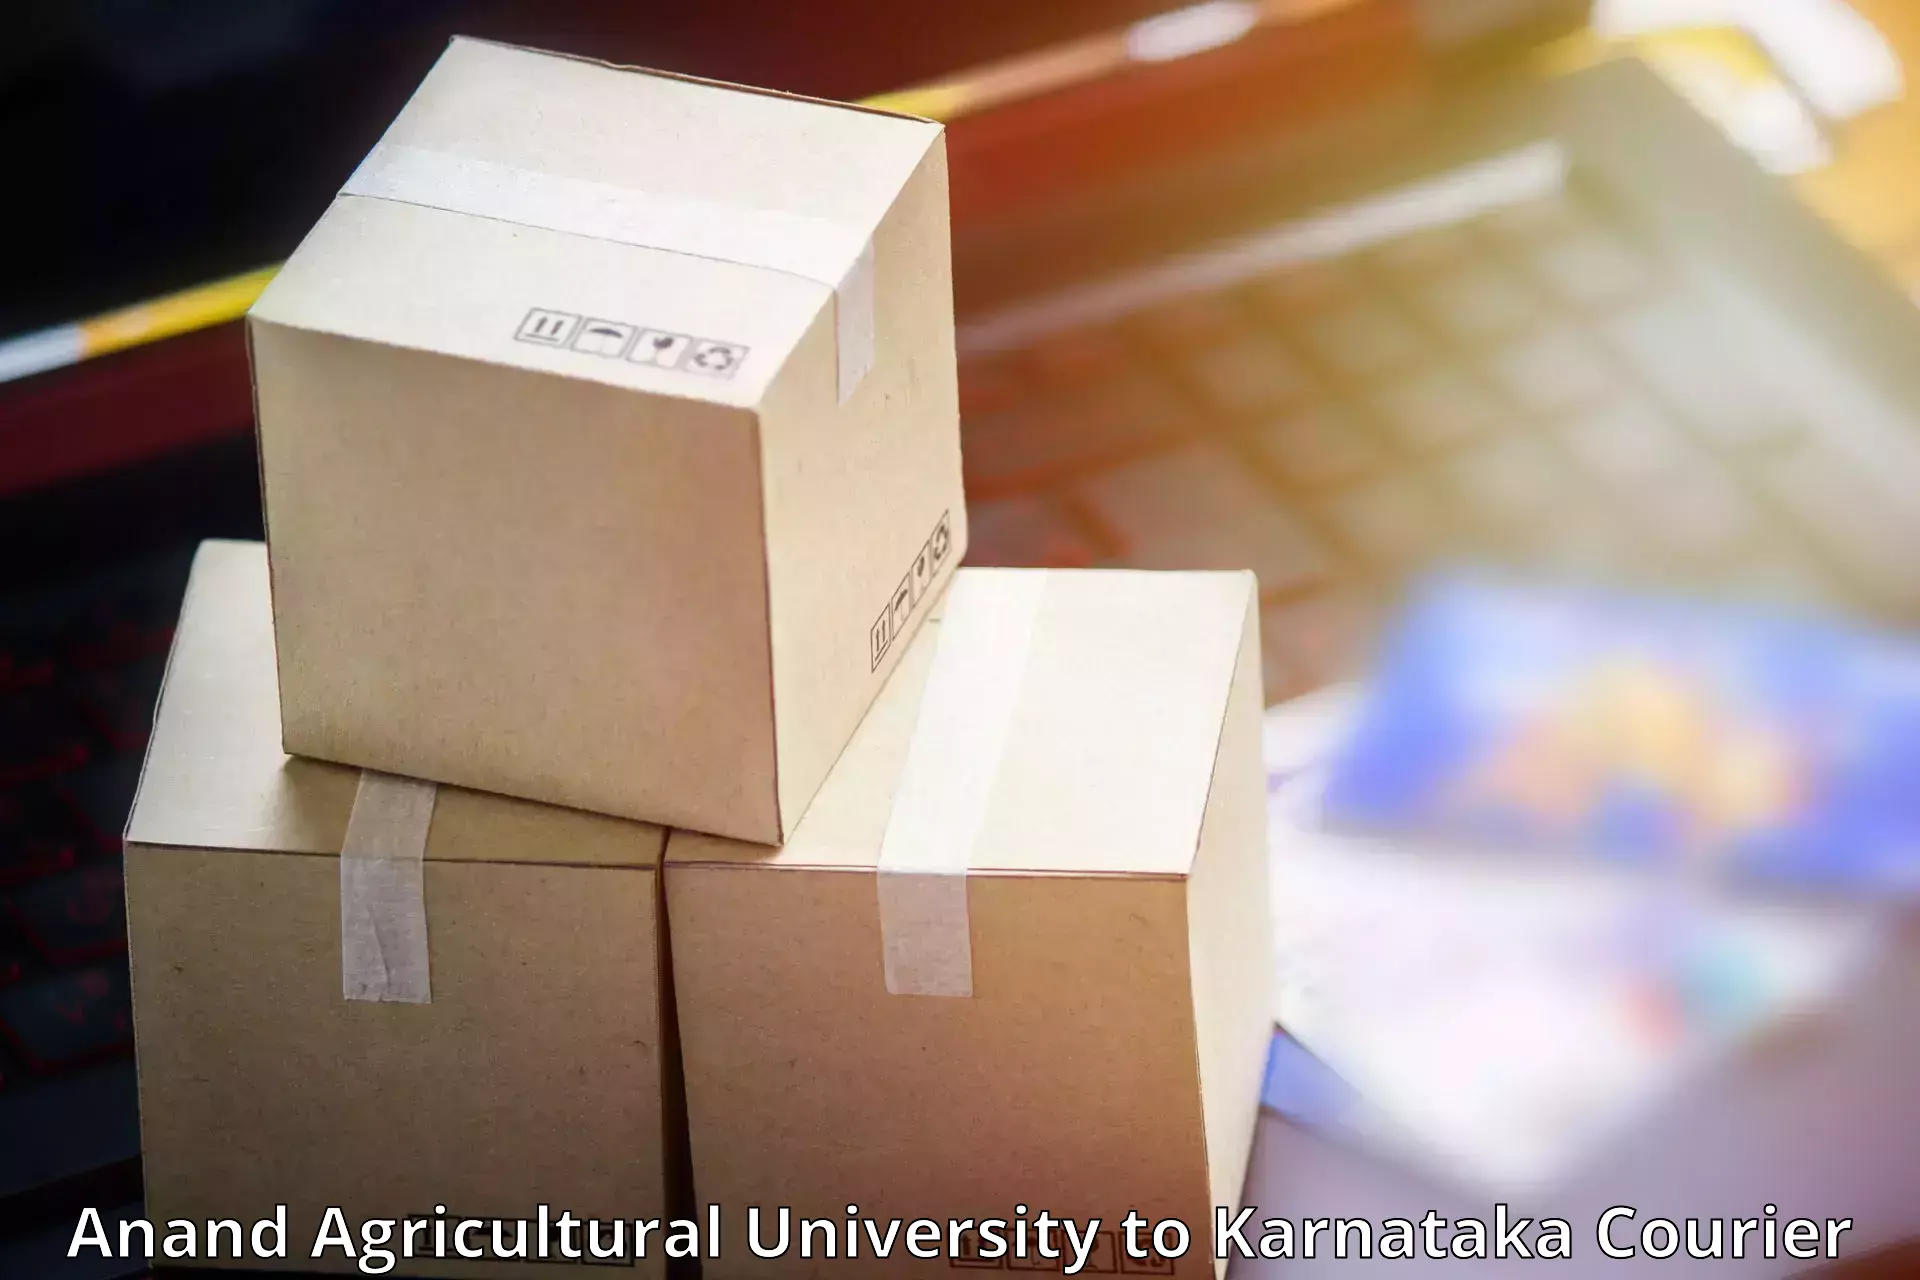 Express package handling Anand Agricultural University to Karwar